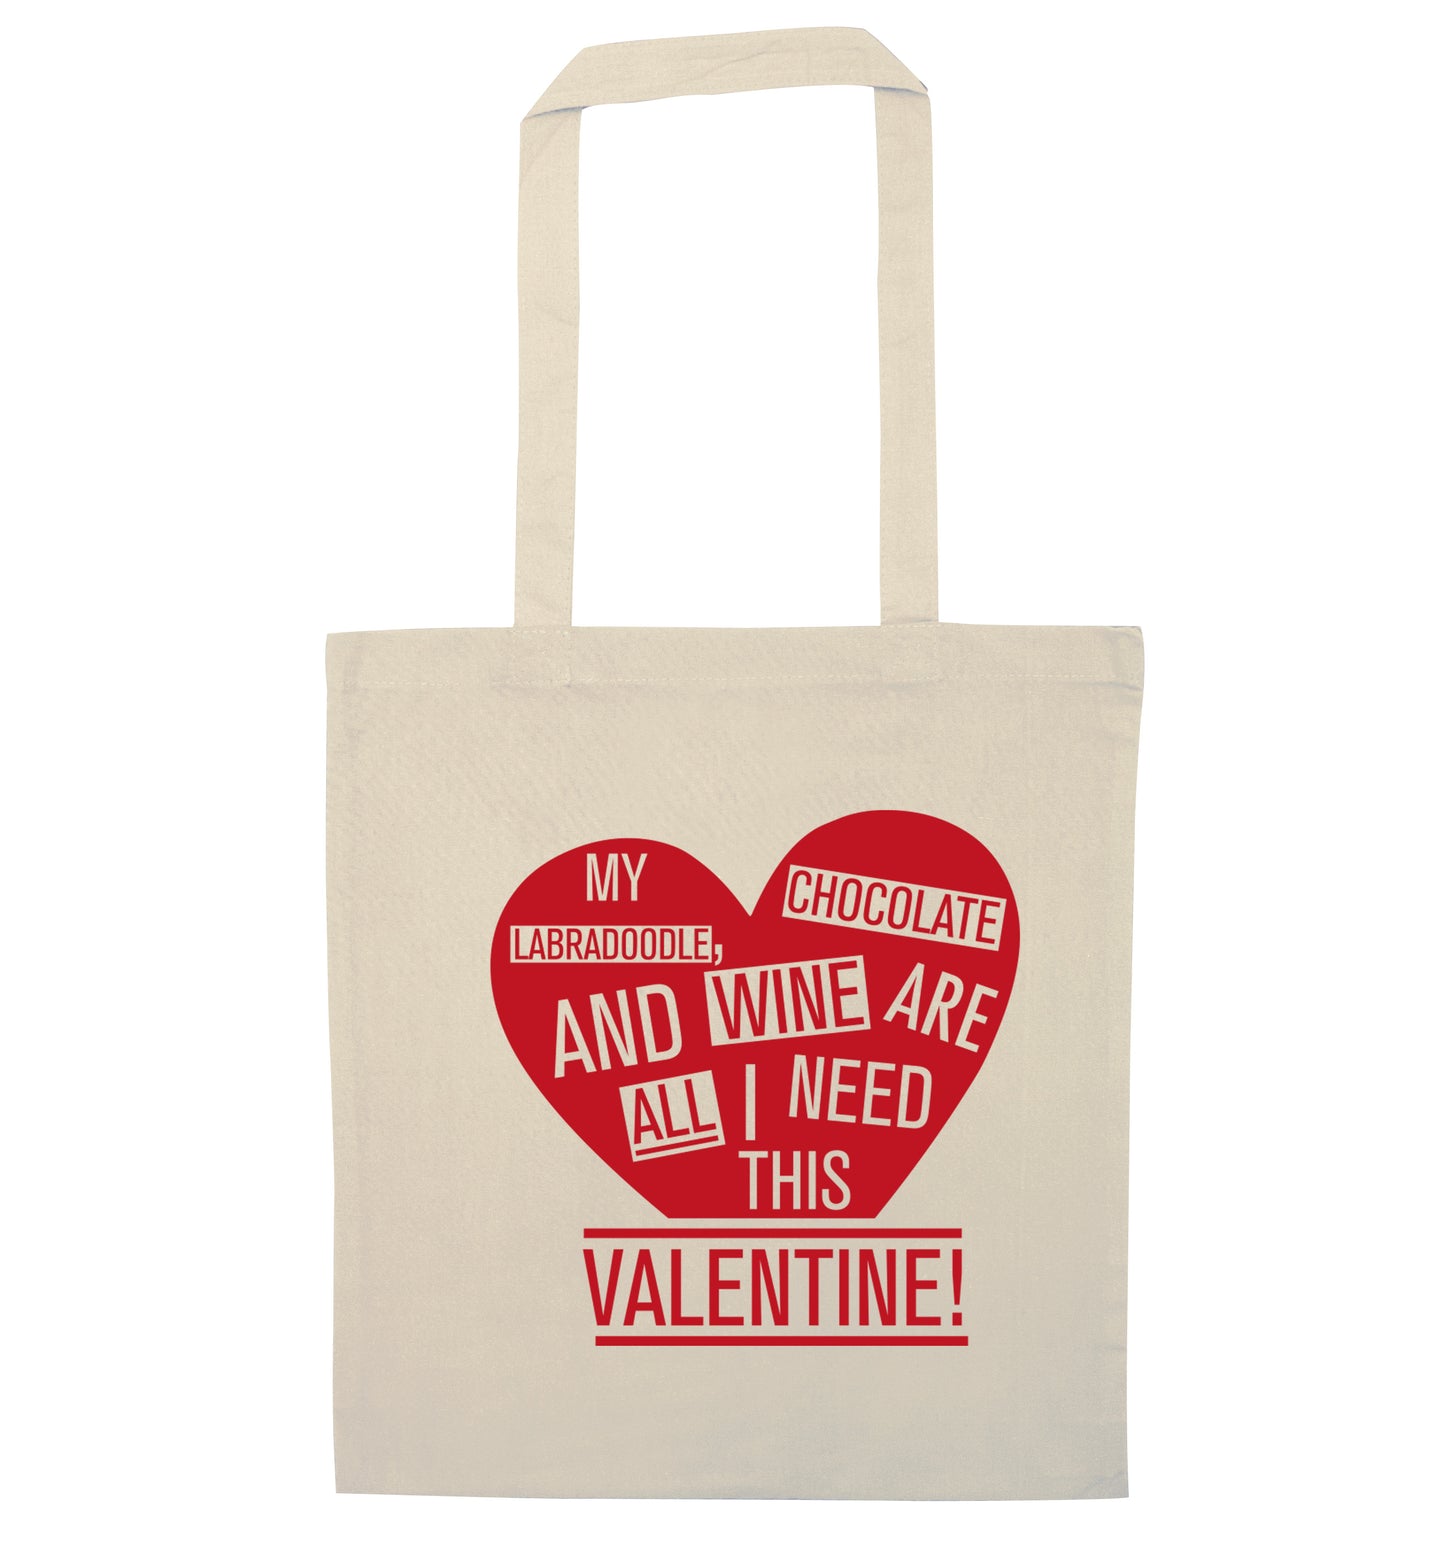 My labradoodle, chocolate and wine are all I need this valentine! natural tote bag